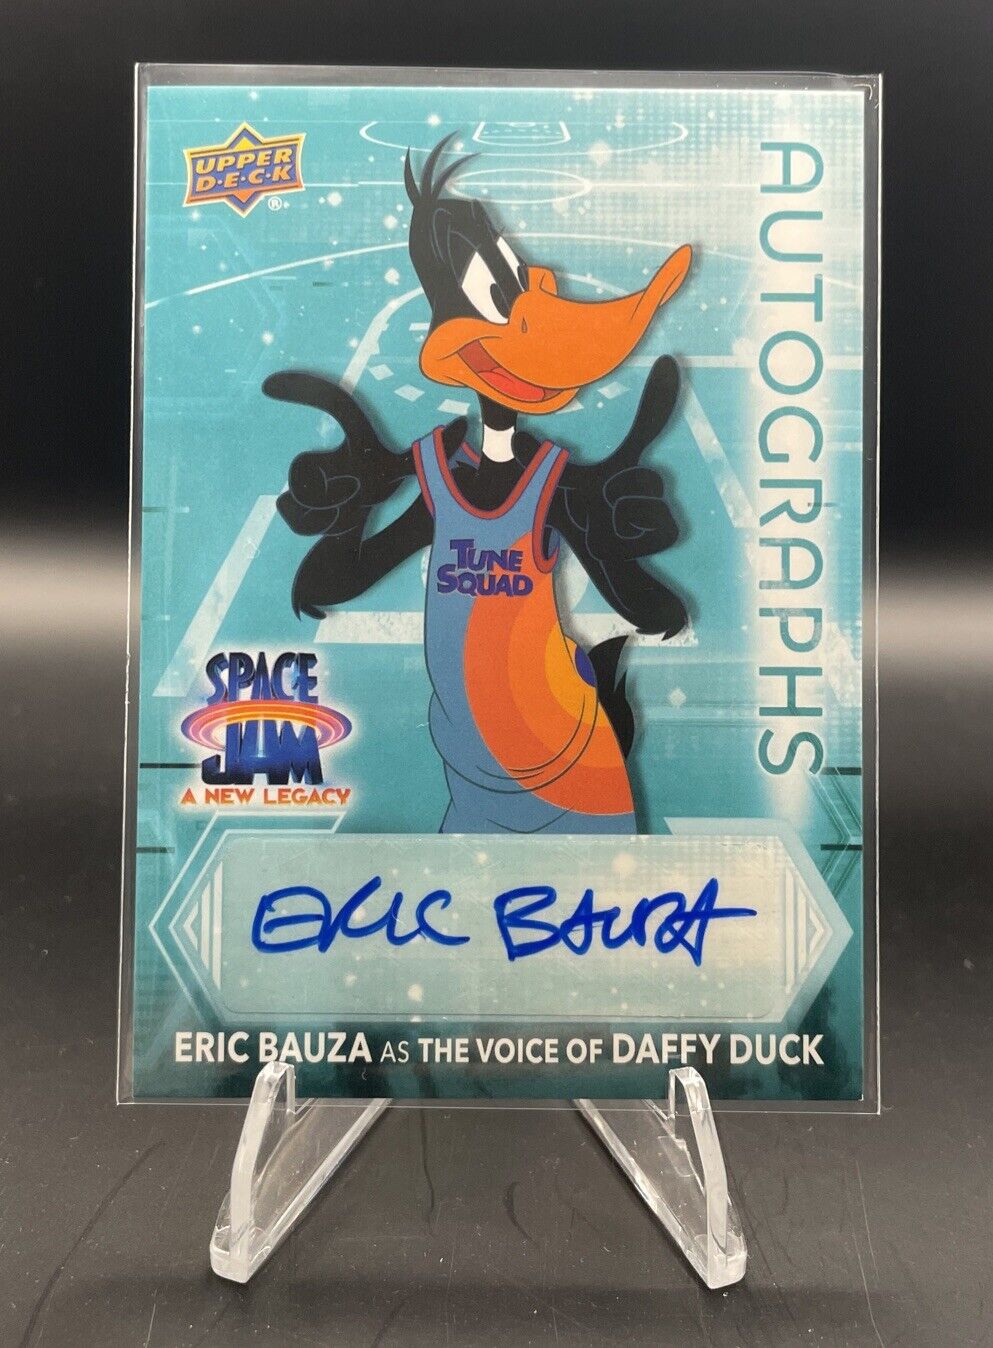 Upper Deck Space Jam A New Legacy Eric Bauza Teal Auto Autograph Daffy Duck A